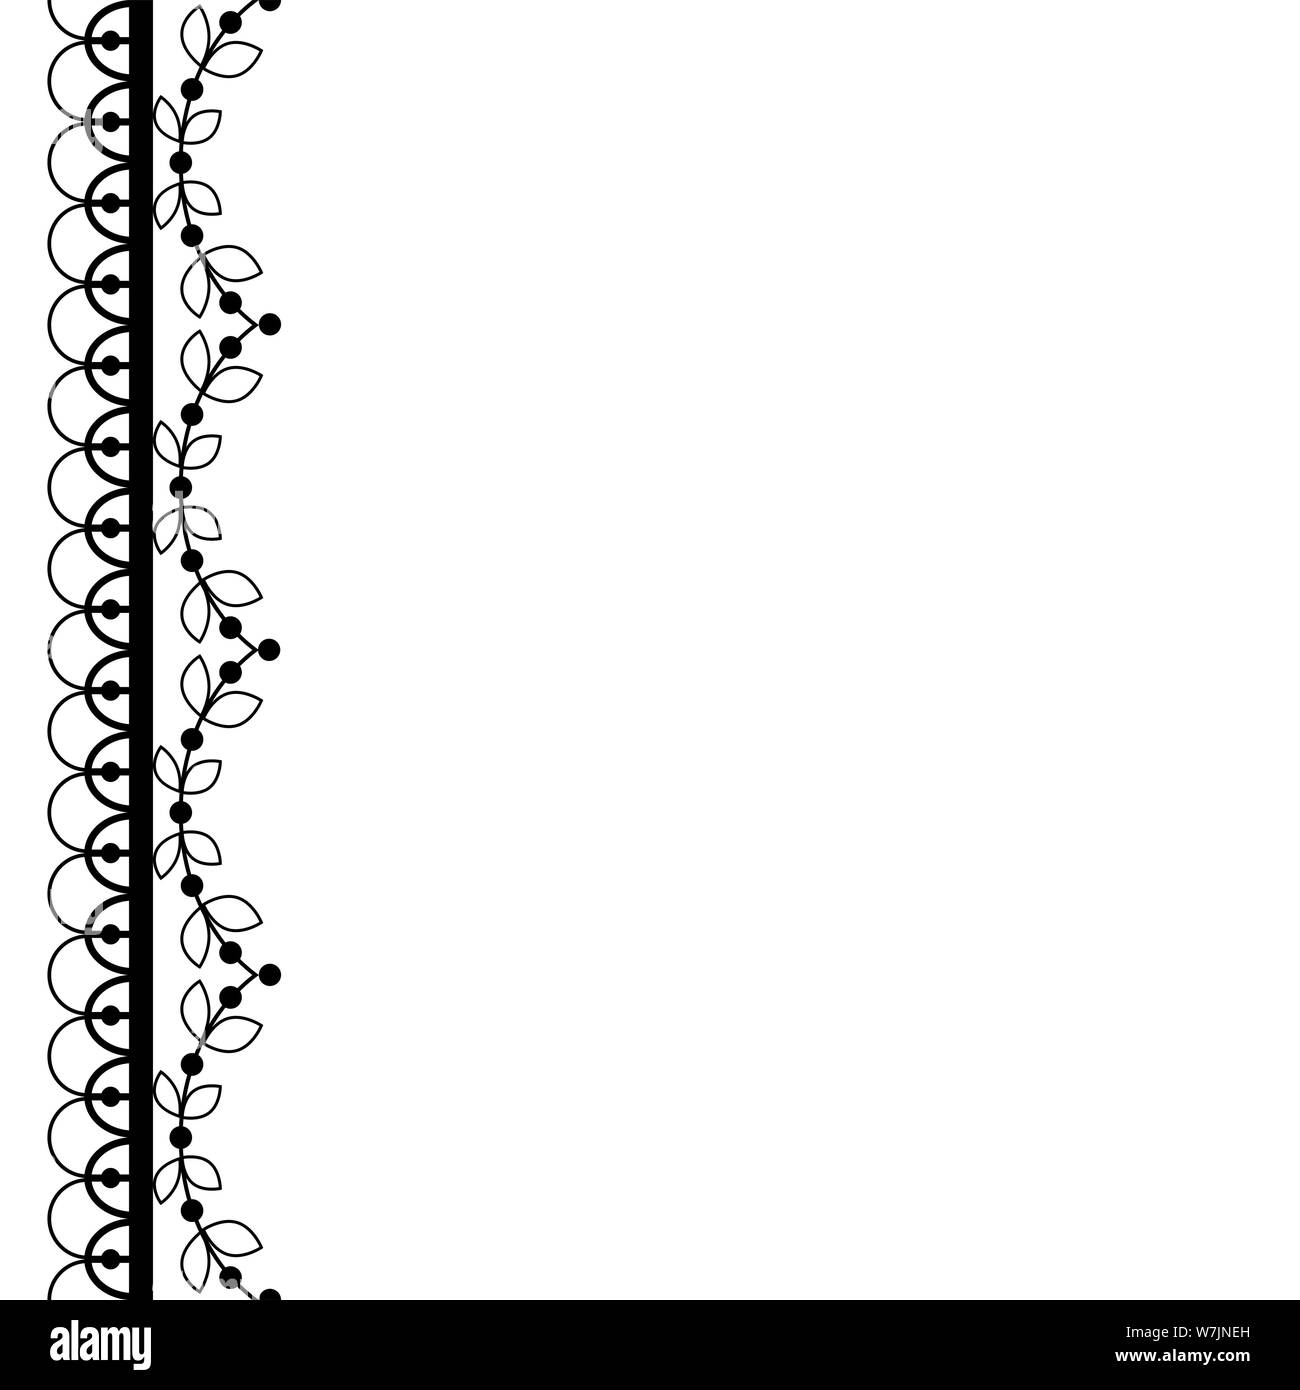 Retro lace pattern vector greeting card or wedding or birthday party invitation, ornamental repetitive design with flowers and swirls in black Stock Vector